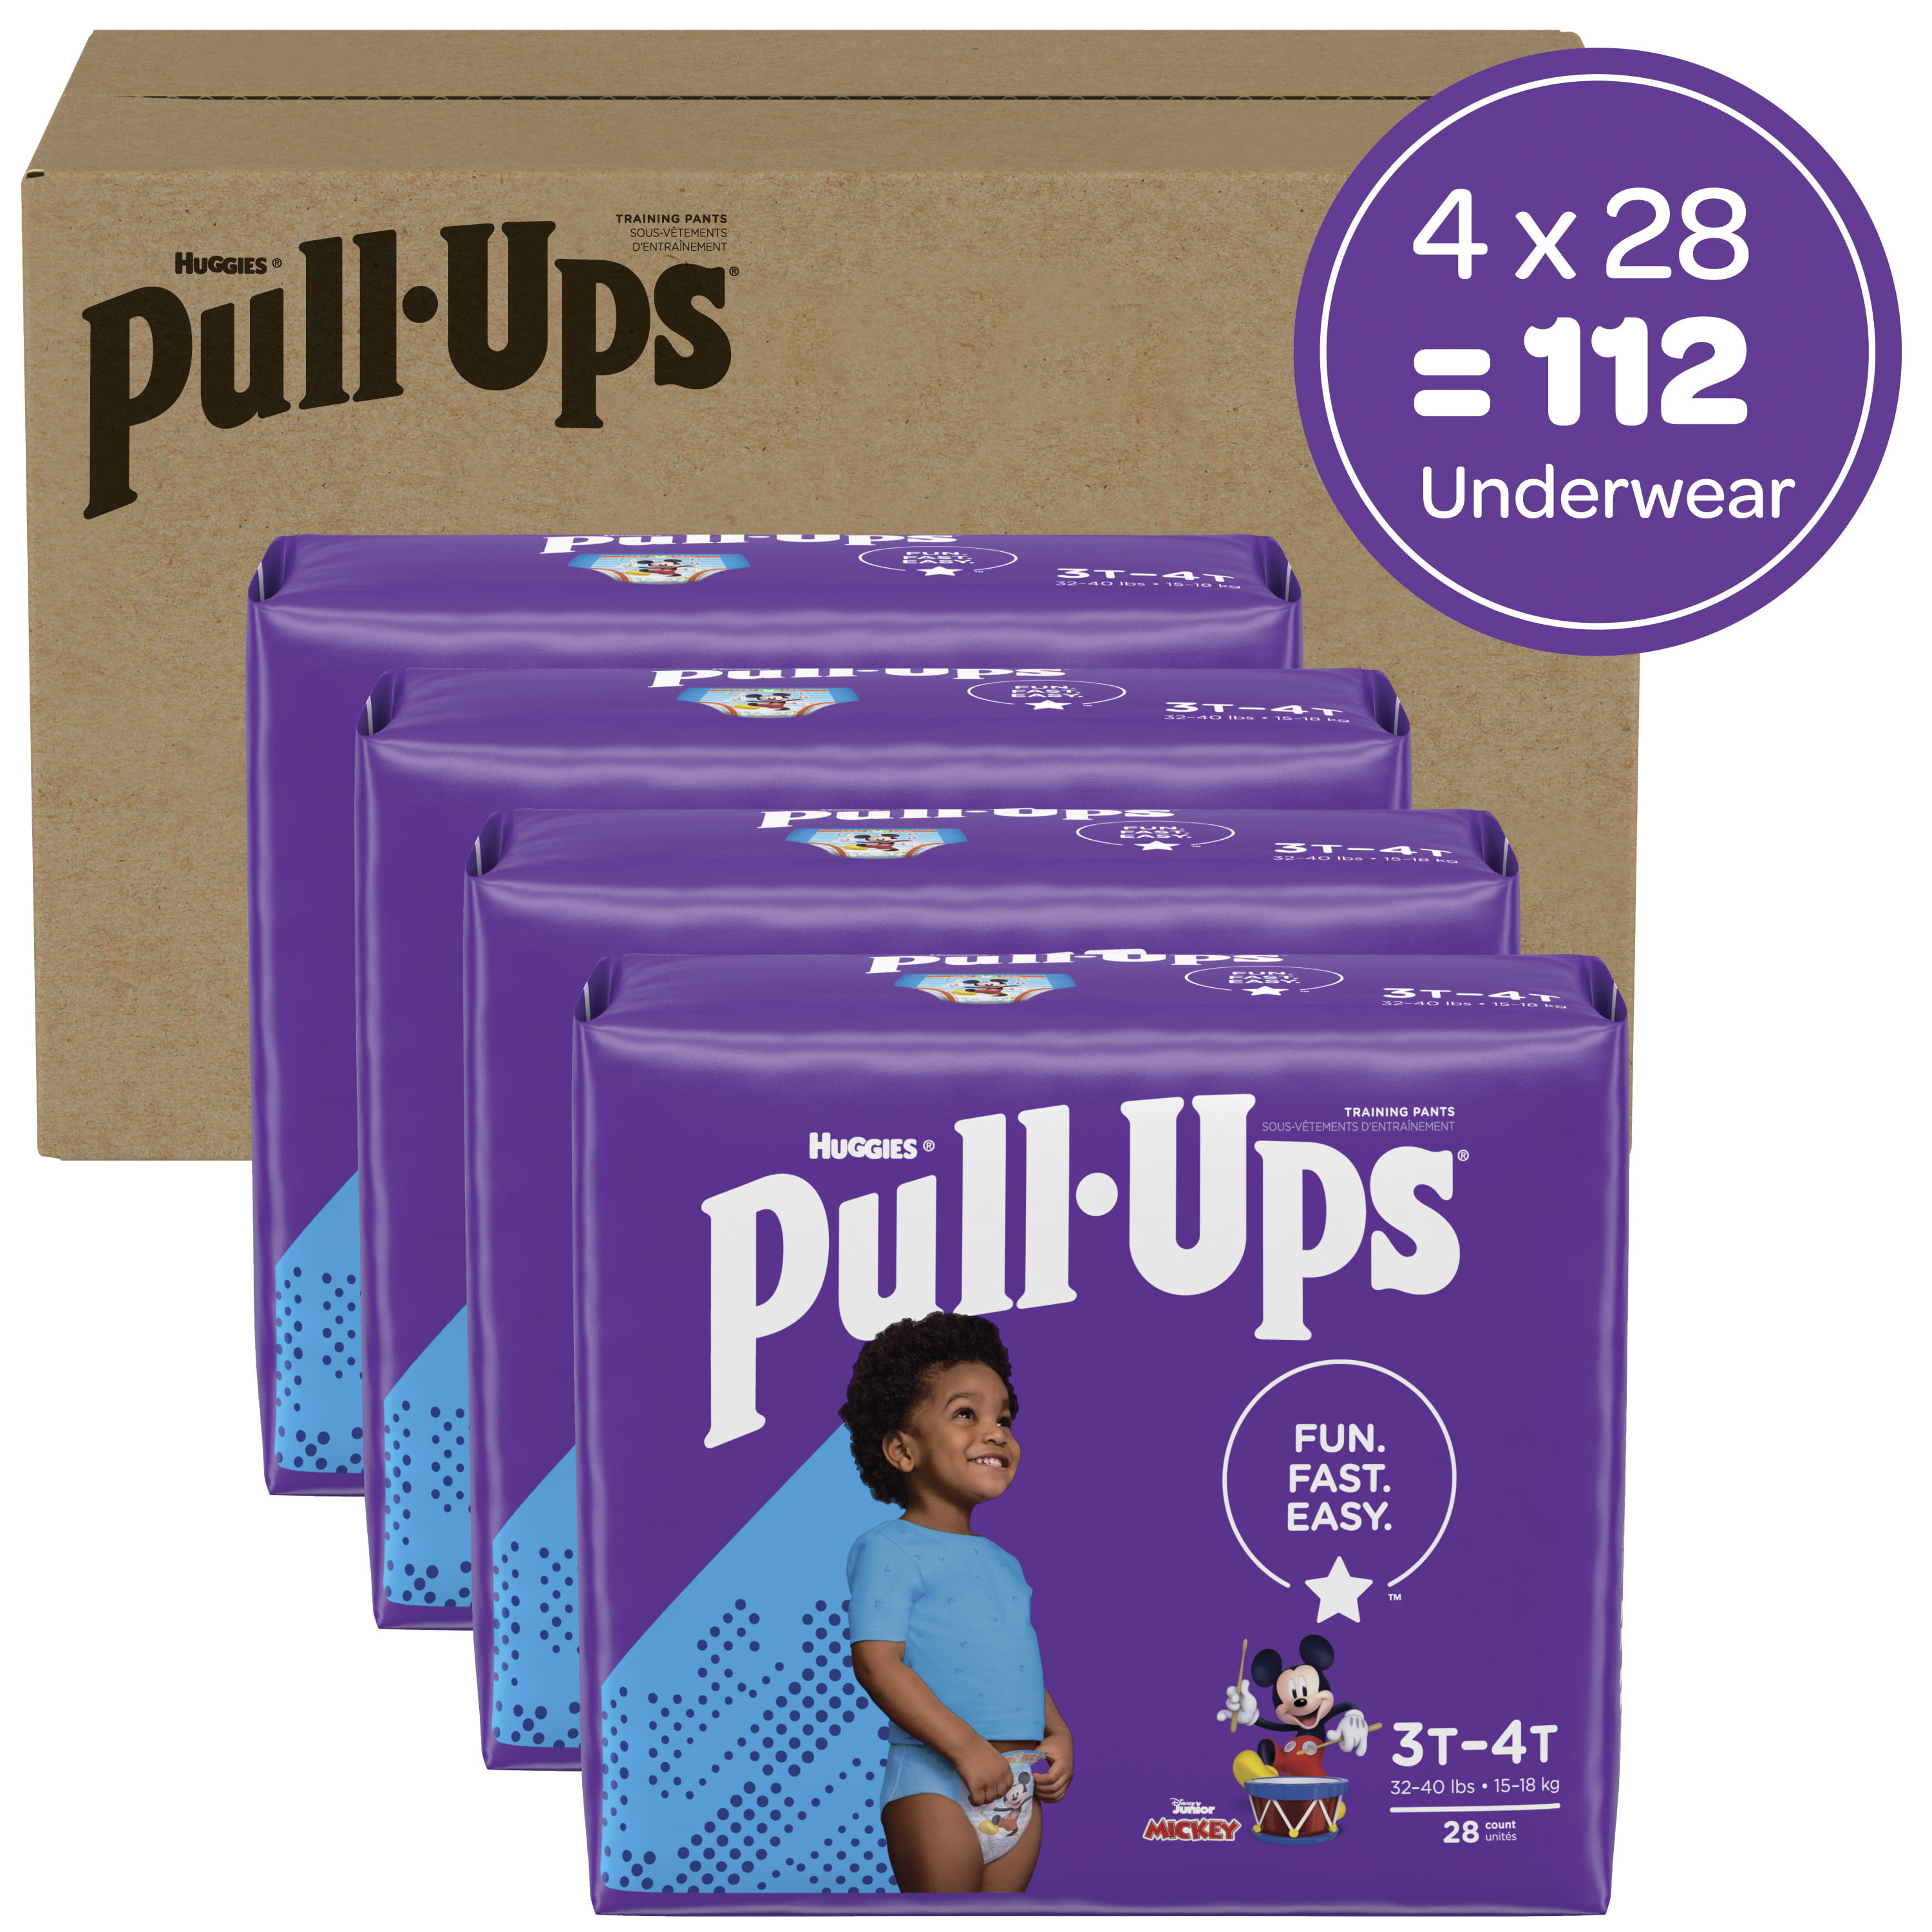 Huggies Pull-Ups Boys' Potty Training Pants Size 5, 112 Ct, 3T-4T (32-40  lb.), One Month Supply